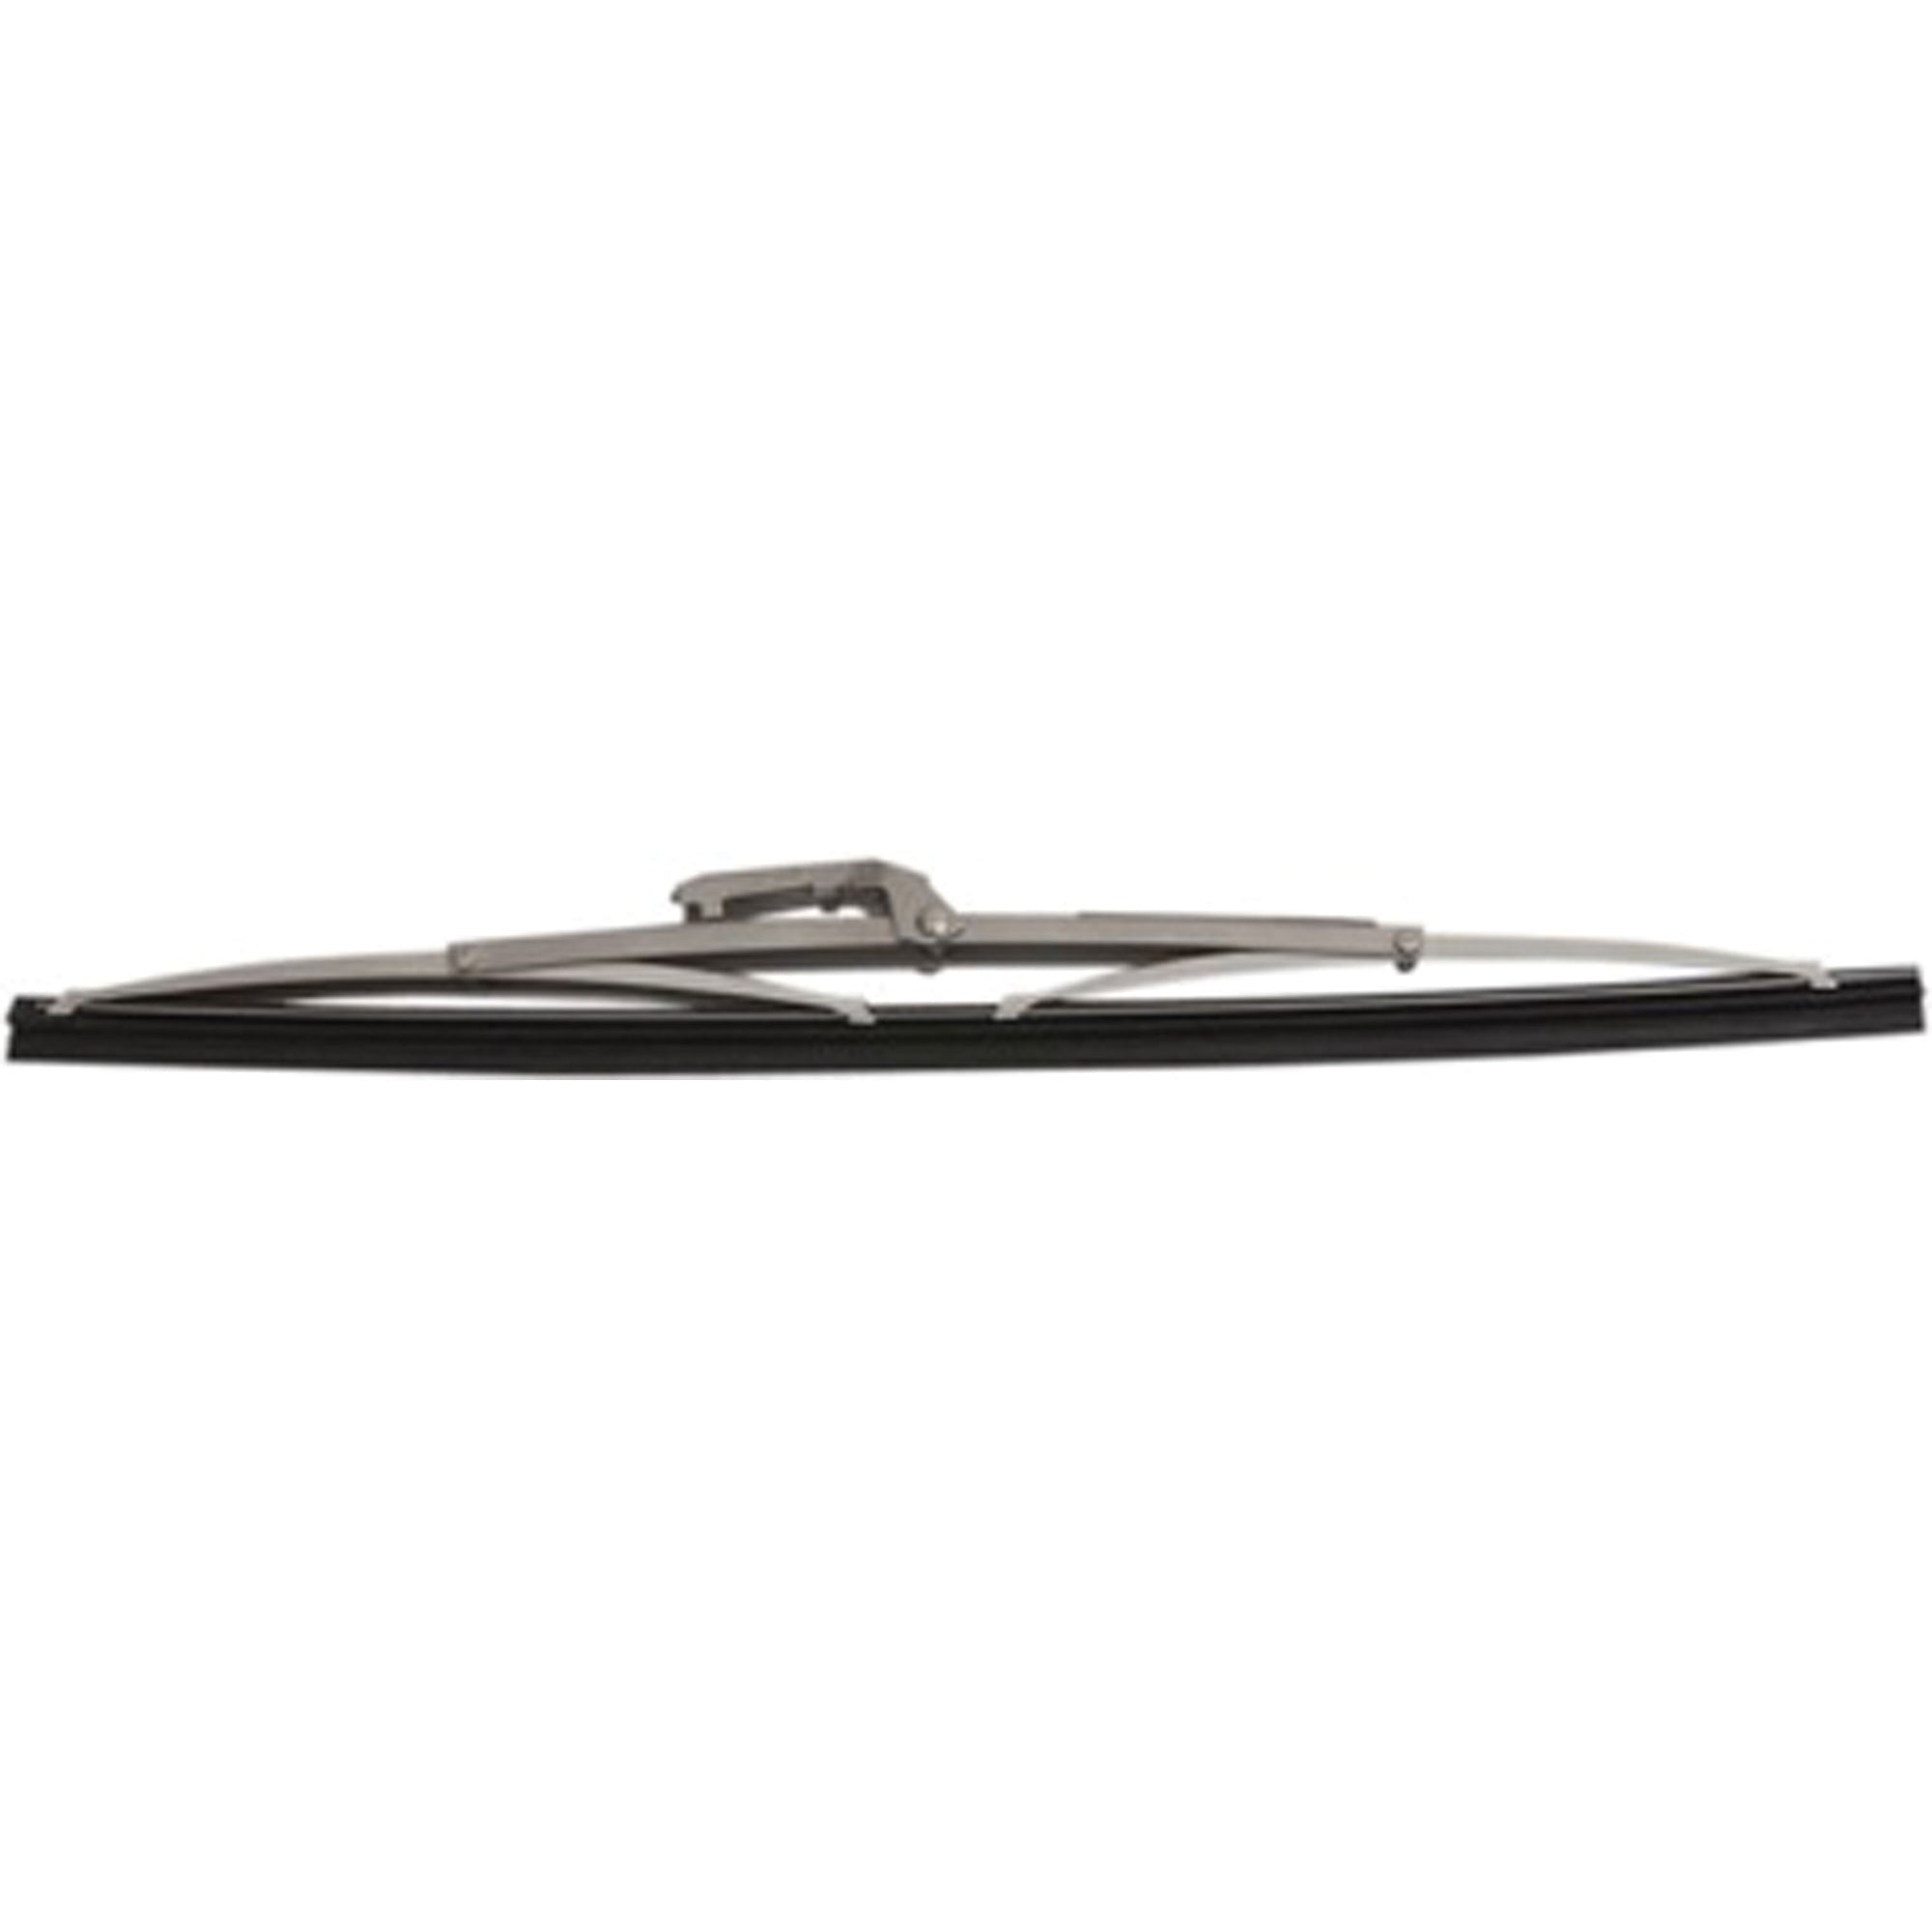 Sea-Dog 414214S-1 Stainless Steel Wiper Blade - 14", Silver